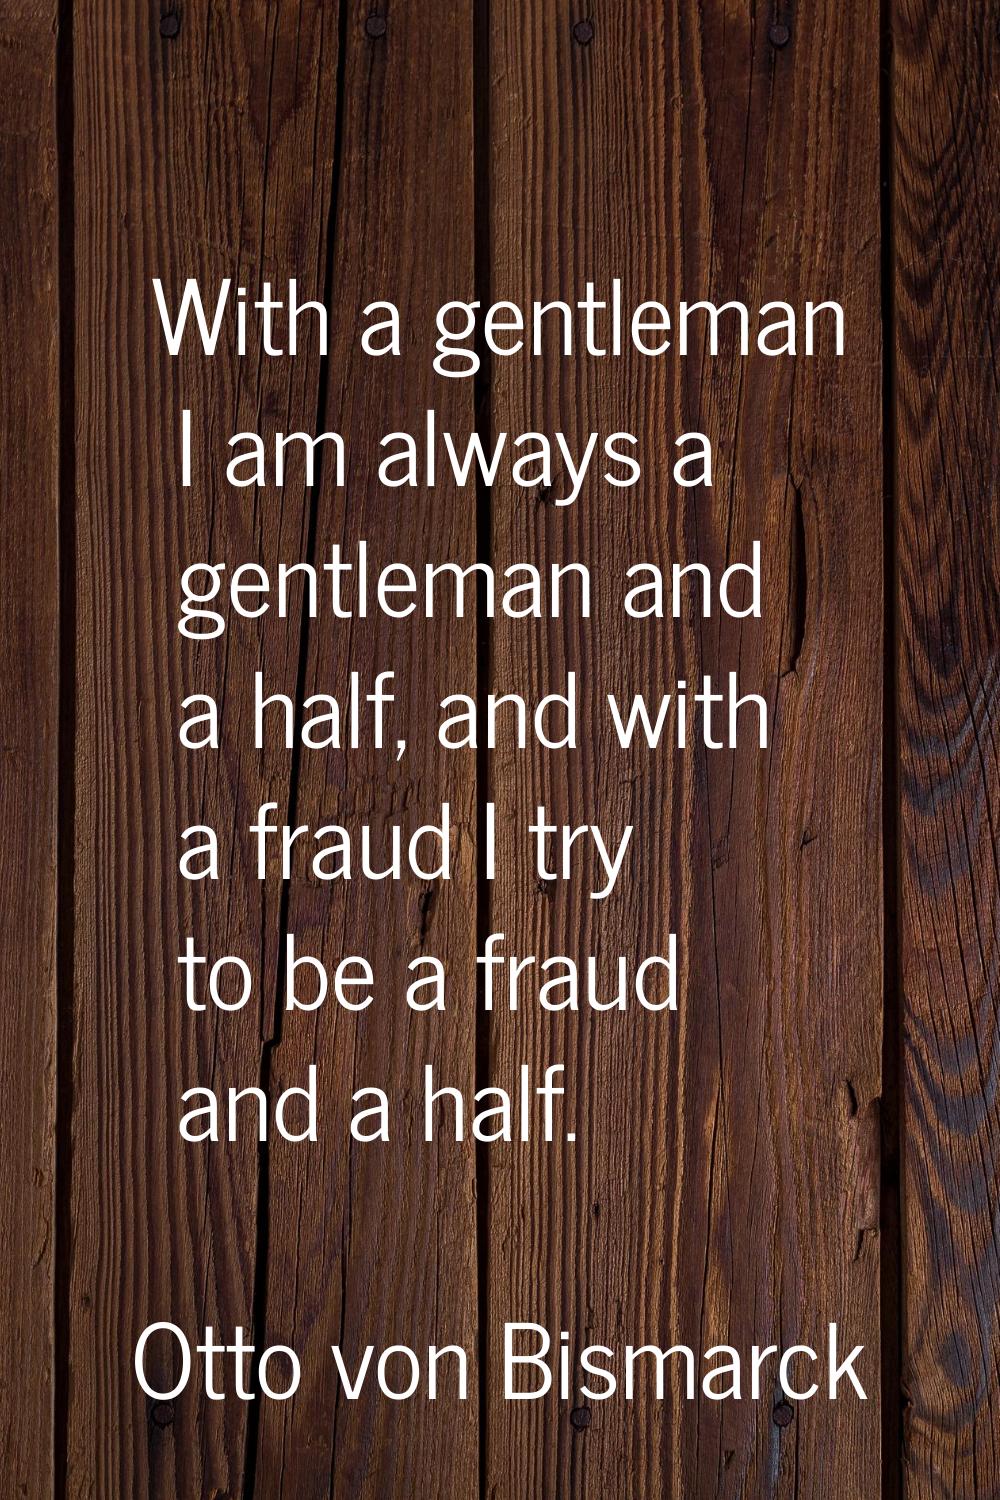 With a gentleman I am always a gentleman and a half, and with a fraud I try to be a fraud and a hal